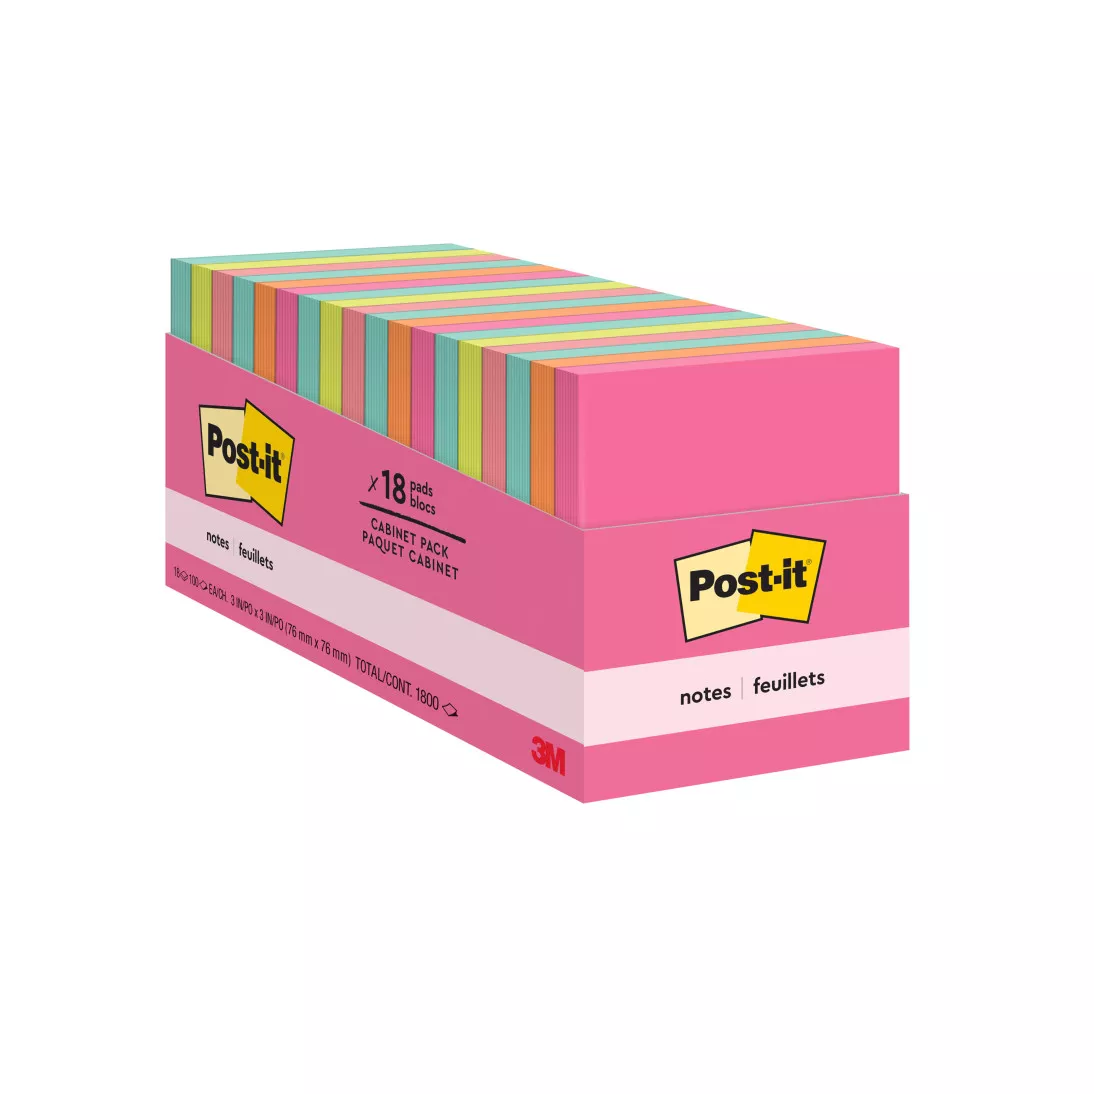 Post-it® Notes 654-18CTCP, 3 in x 3 in (76 mm x 76 mm),Cabinet pack,
Cape Town Collection, 18 Pads/Pack, 100 Sheets/Pad